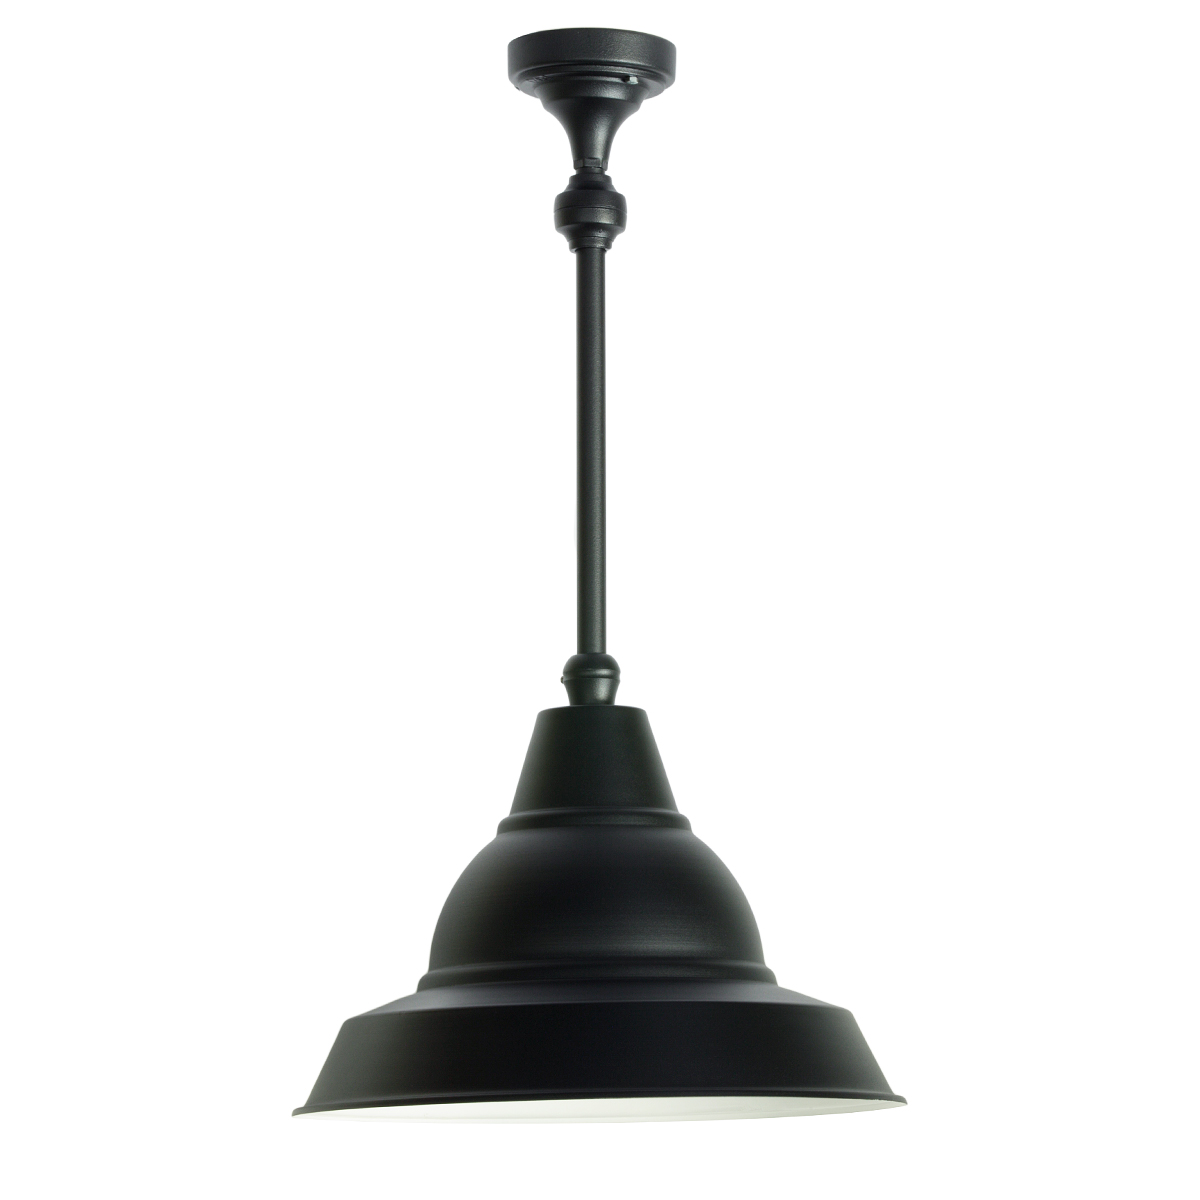 Adjustable Ceiling Lamp for the Outdoors